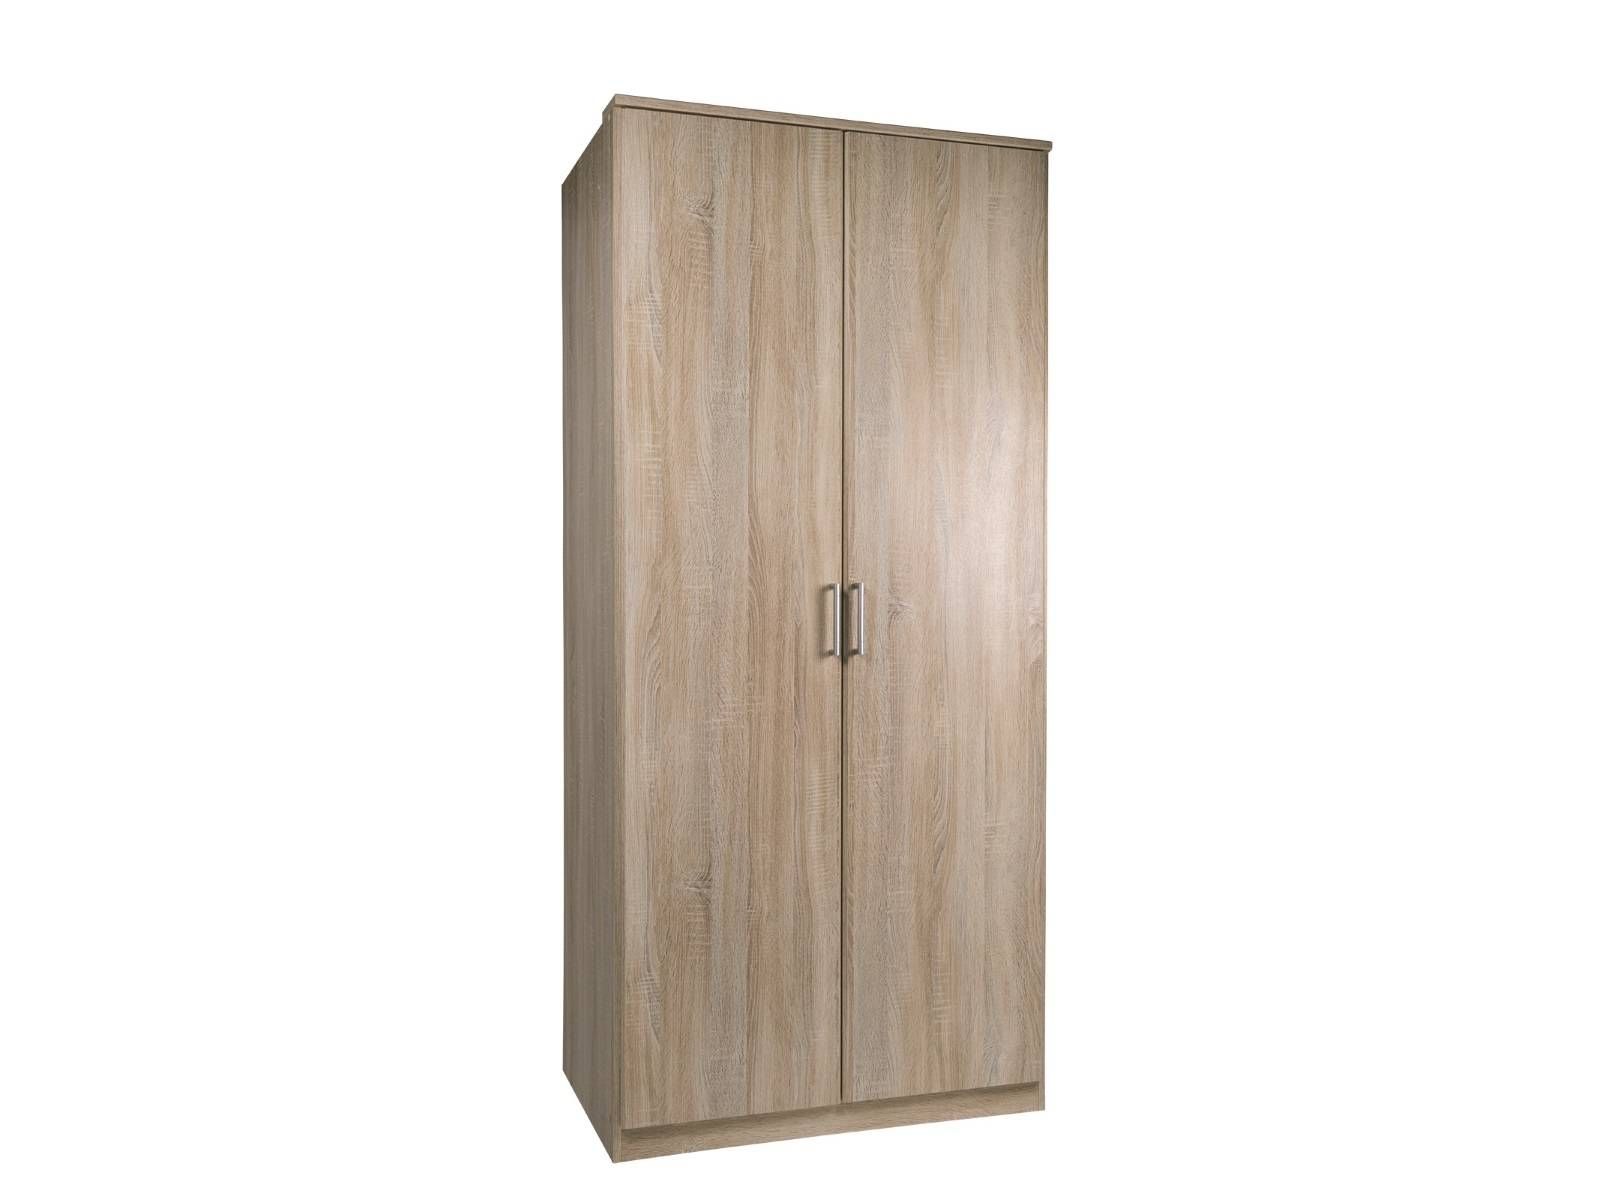 Cheap Wardrobes | Bedroom Furniture For Sale | Double Wardrobe Inside Bargain Wardrobes (View 5 of 15)